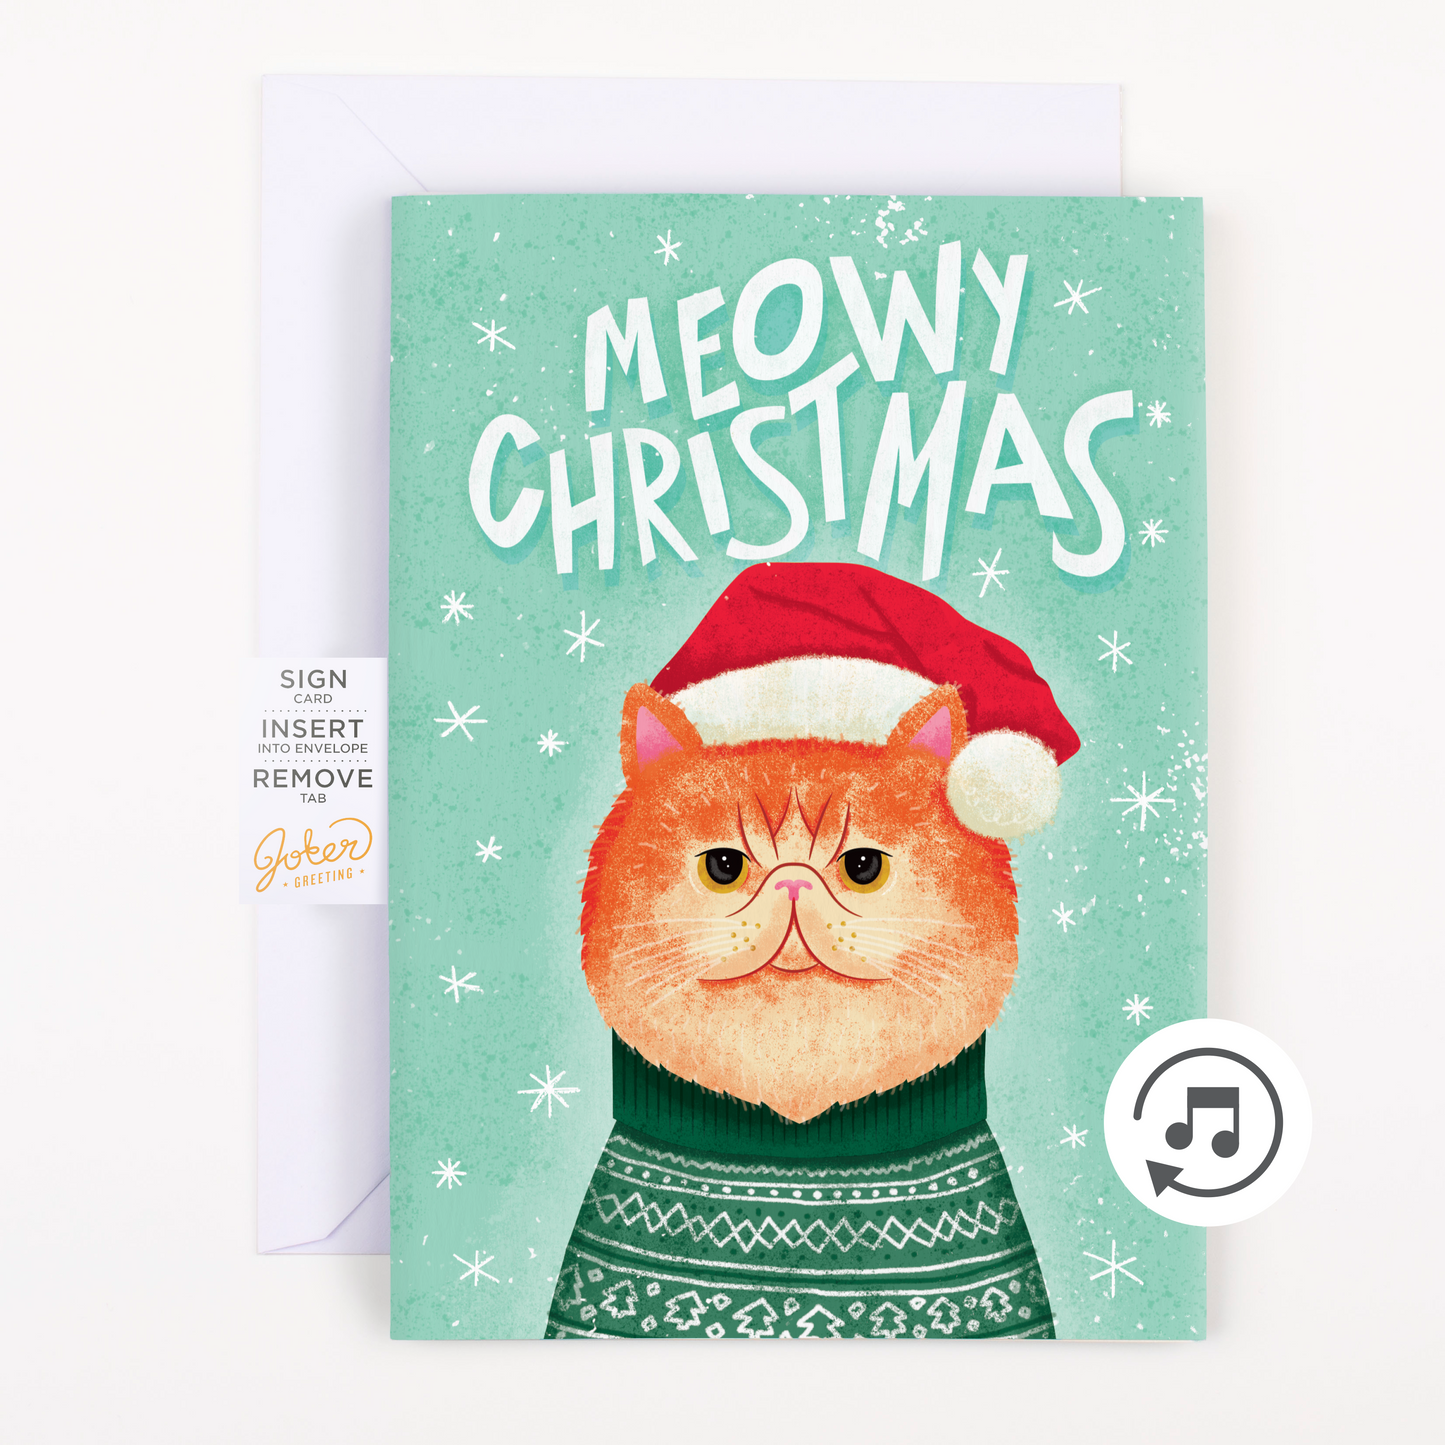 Endless Meowy Christmas With Glitter